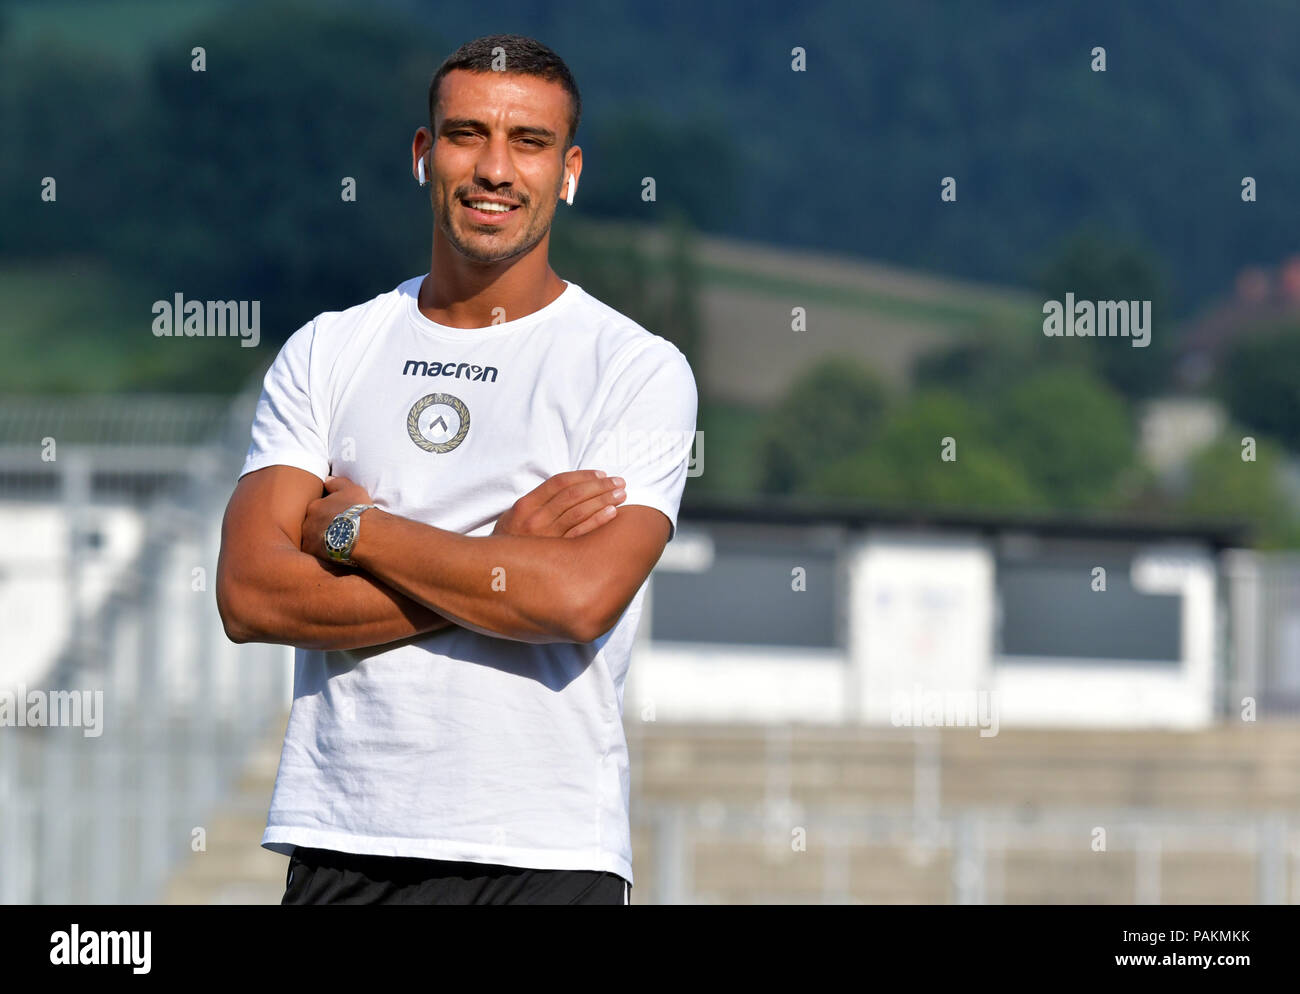 Wolfsberger, Austria, 24 July 2018. Udinese's Al“ Adnan before the pre season friendly football match between RZ Pellets WAC and Udinese Calcio at Lavanttal Arena. photo Simone Ferraro / Alamy Live News Stock Photo